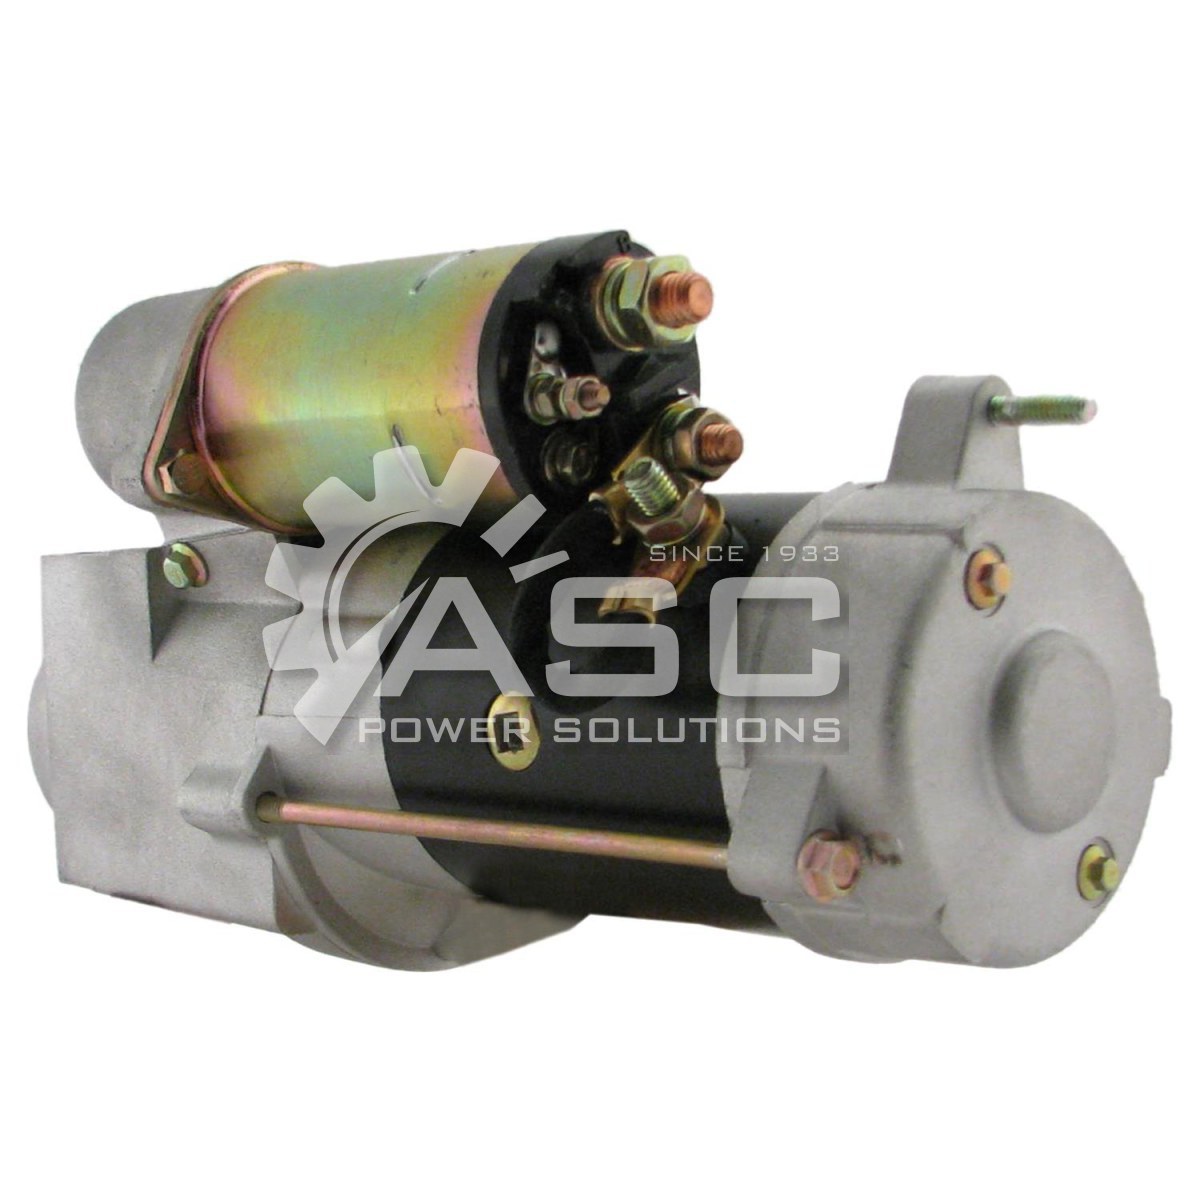 S122100N_NEW ASC POWER SOLUTIONS DELCO STARTER MOTOR FOR MILITARY EQUIPMENT WITH 6.2 LITTER ENGINES 24V 10 TOOTH CLOCKWISE ROTATION OFF SET GEAR REDUCTION (OSGR) 4KW